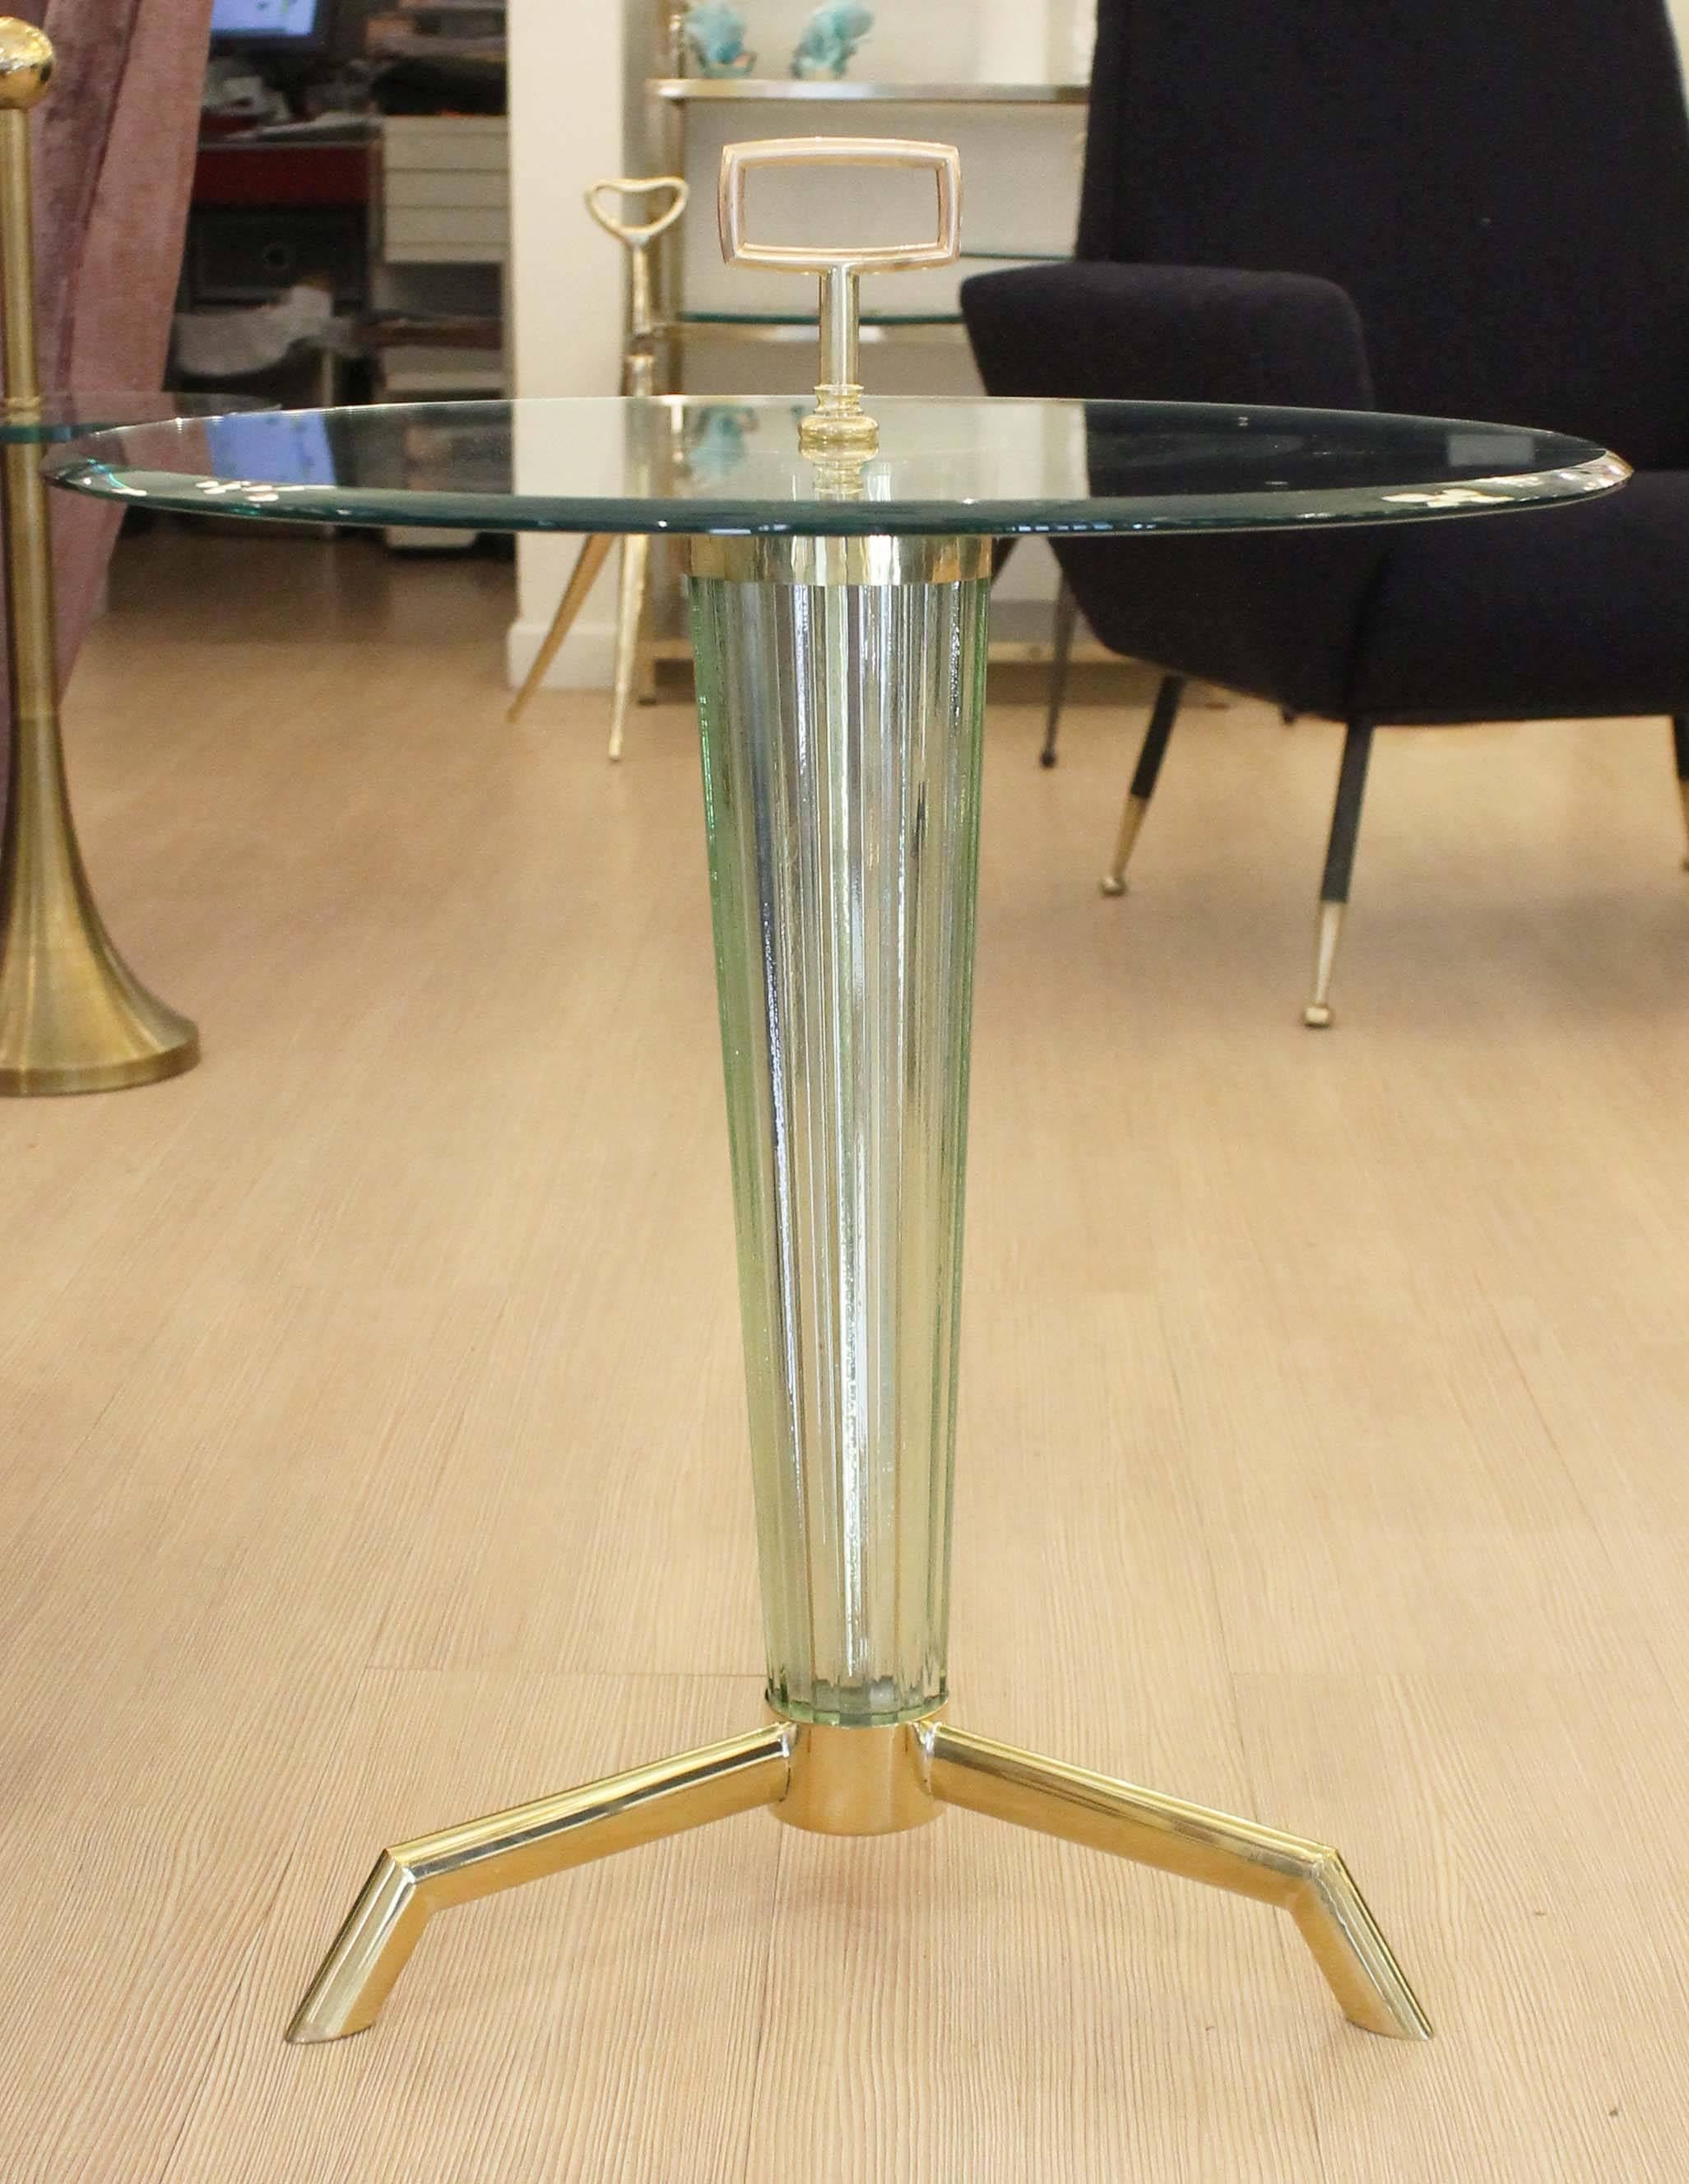 Elegant gueridon or side table with brass feet and handle. The body is a light acqua color ribbed glass. The clear glass top is beveled.